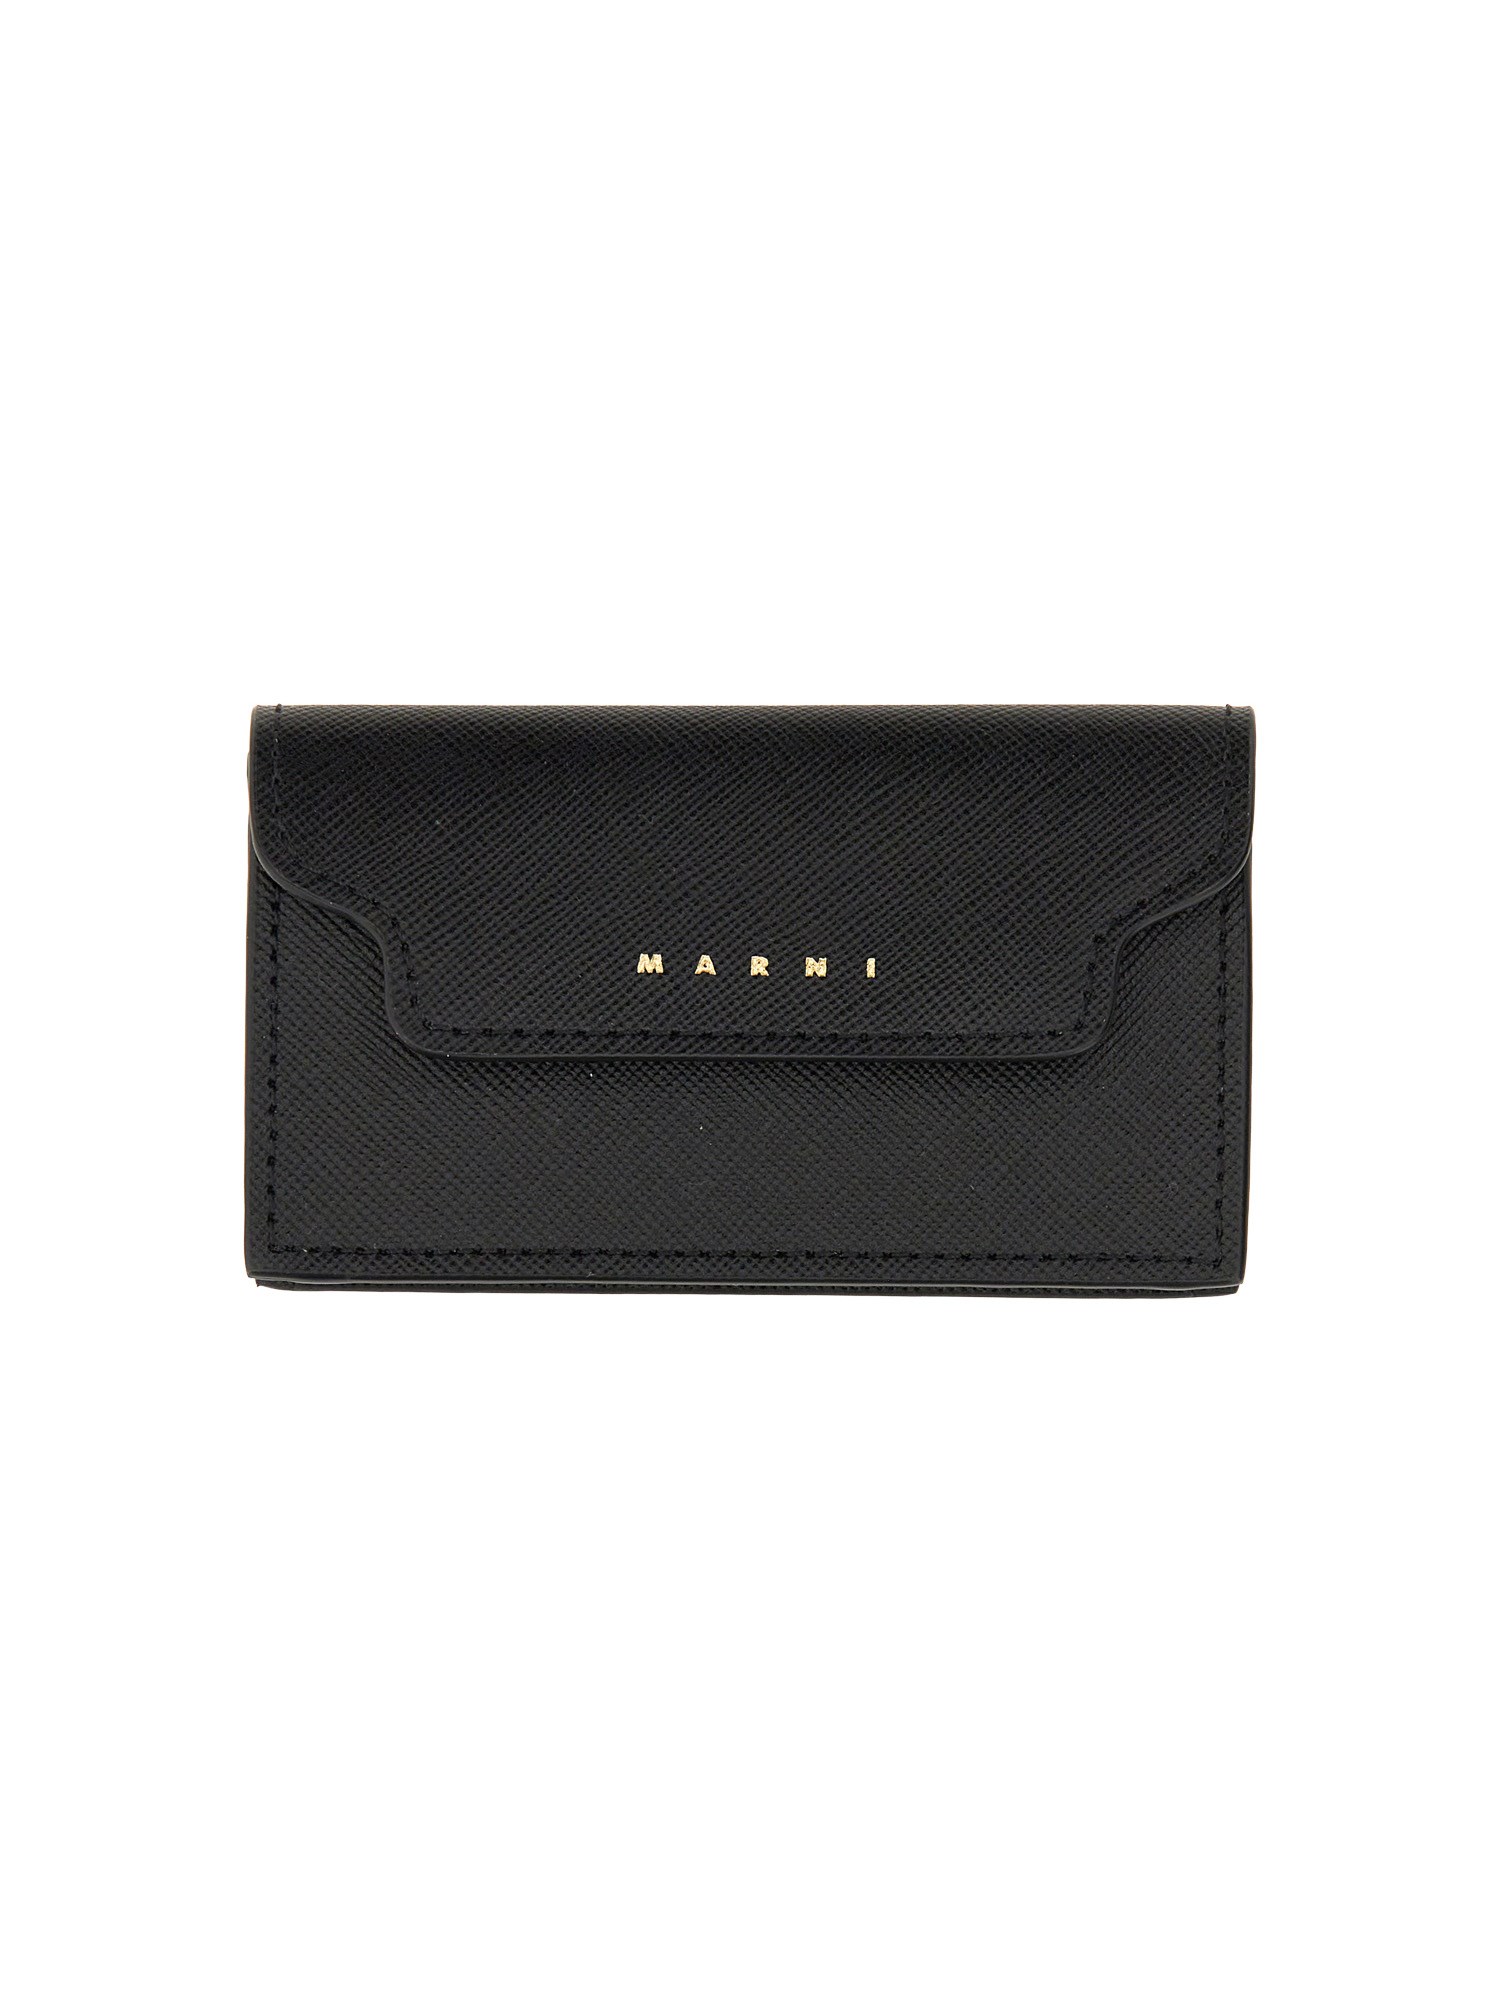 marni square wallet with flap